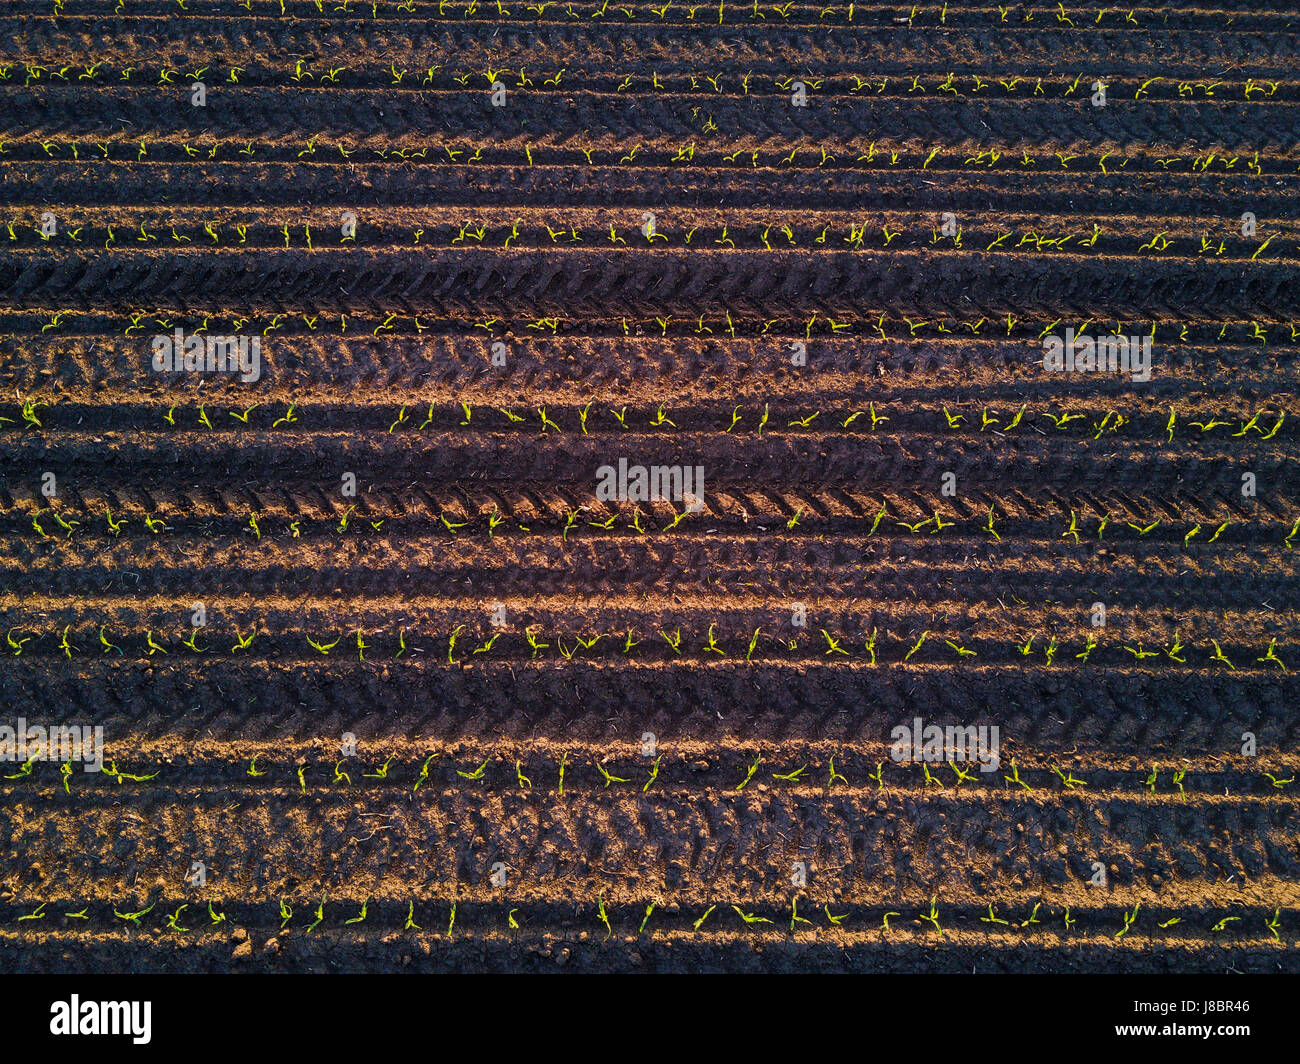 Top view of corn field furrows, aerial view of cultivated maize crops from a drone pov Stock Photo